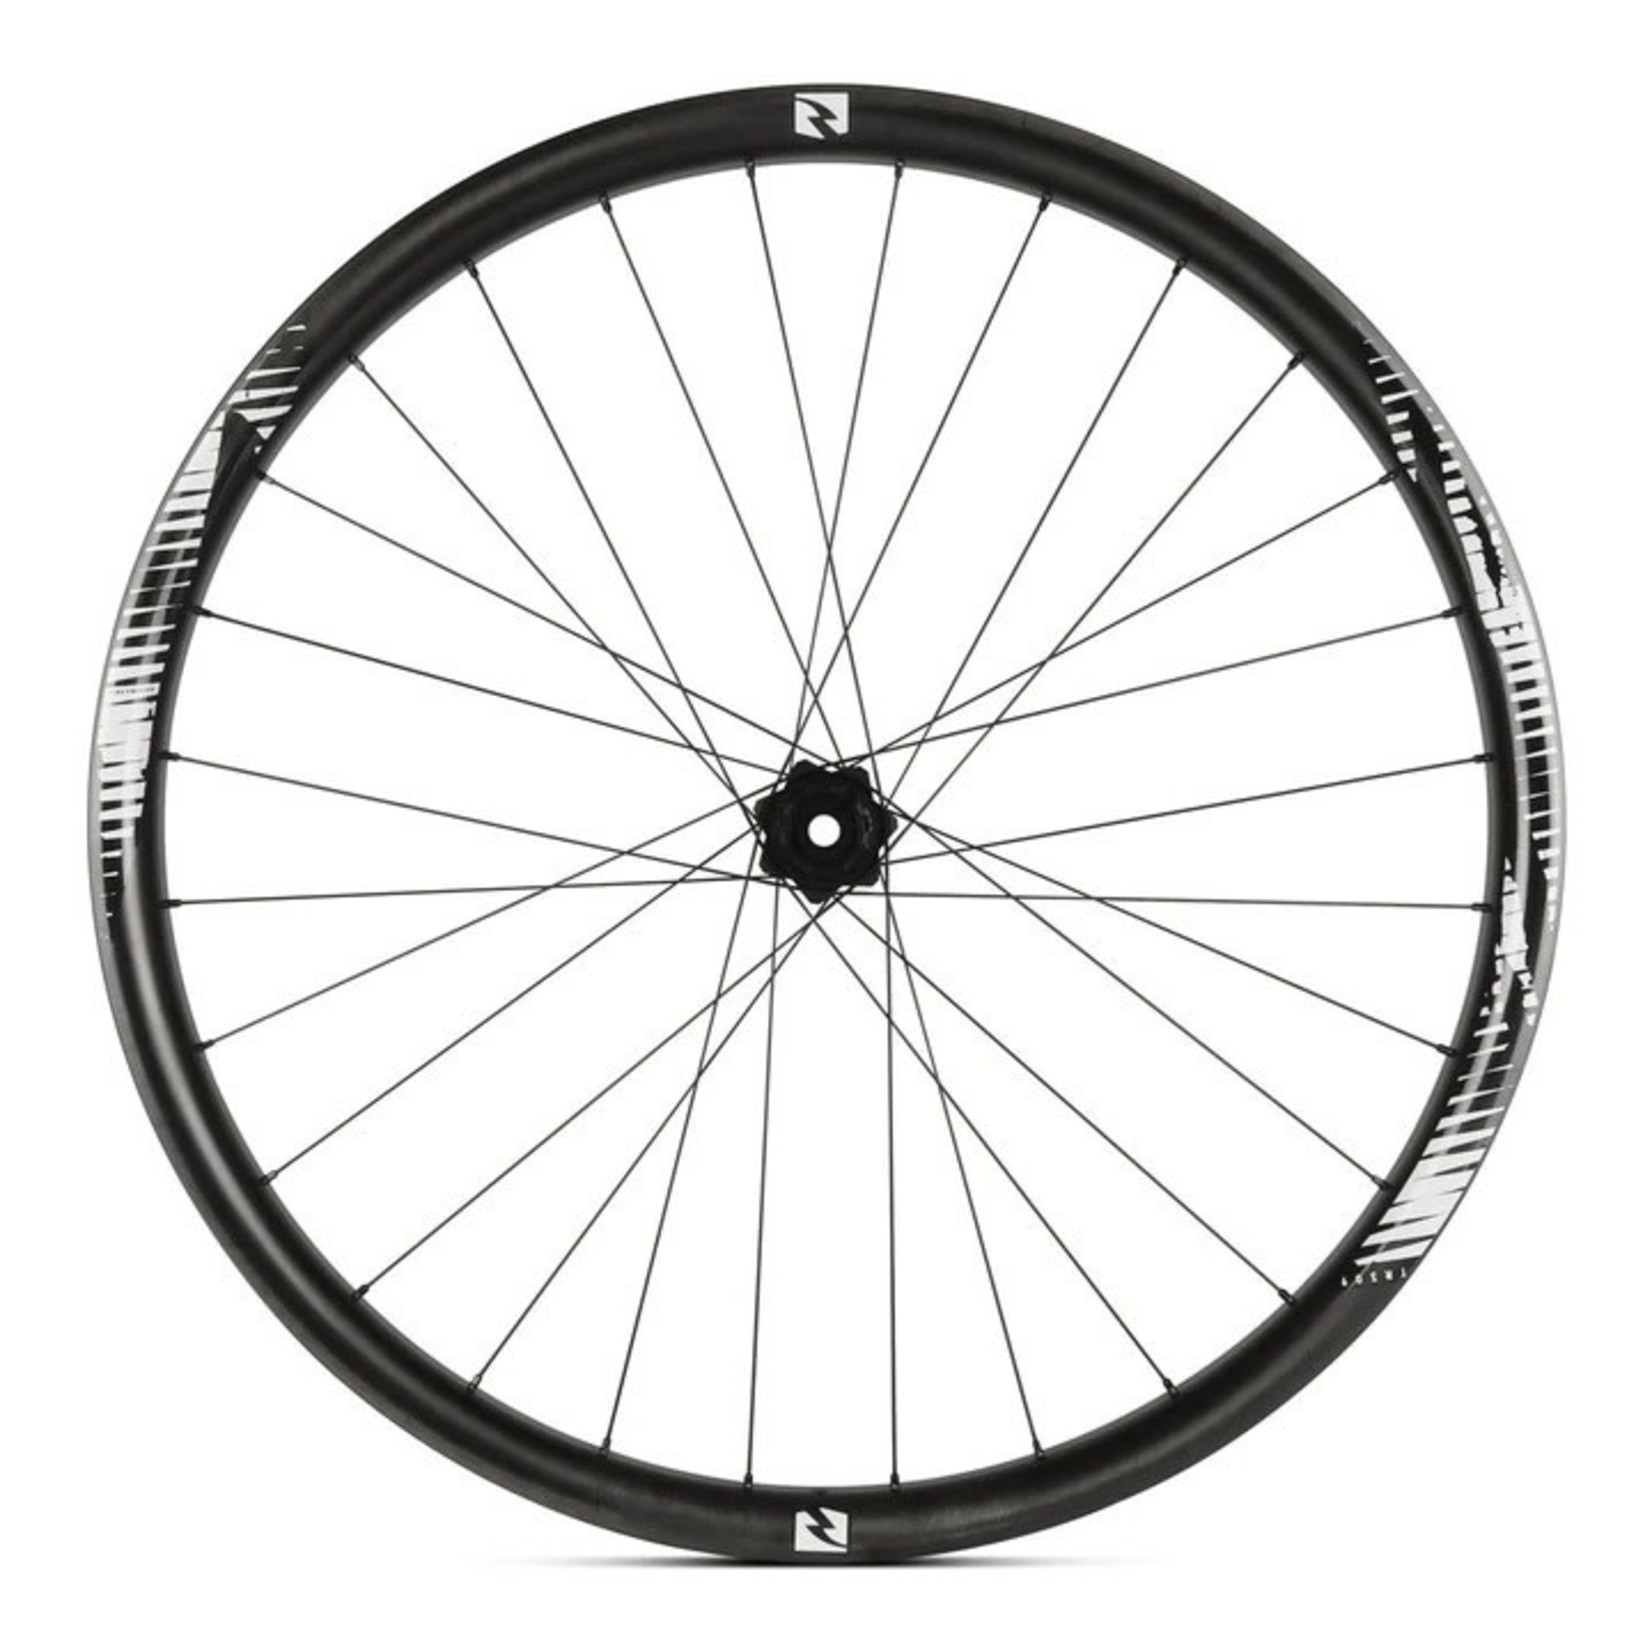 Hayes Reynolds TR 249 - Carbon Mountain Bike Non-Boost Wheelset - 100/142